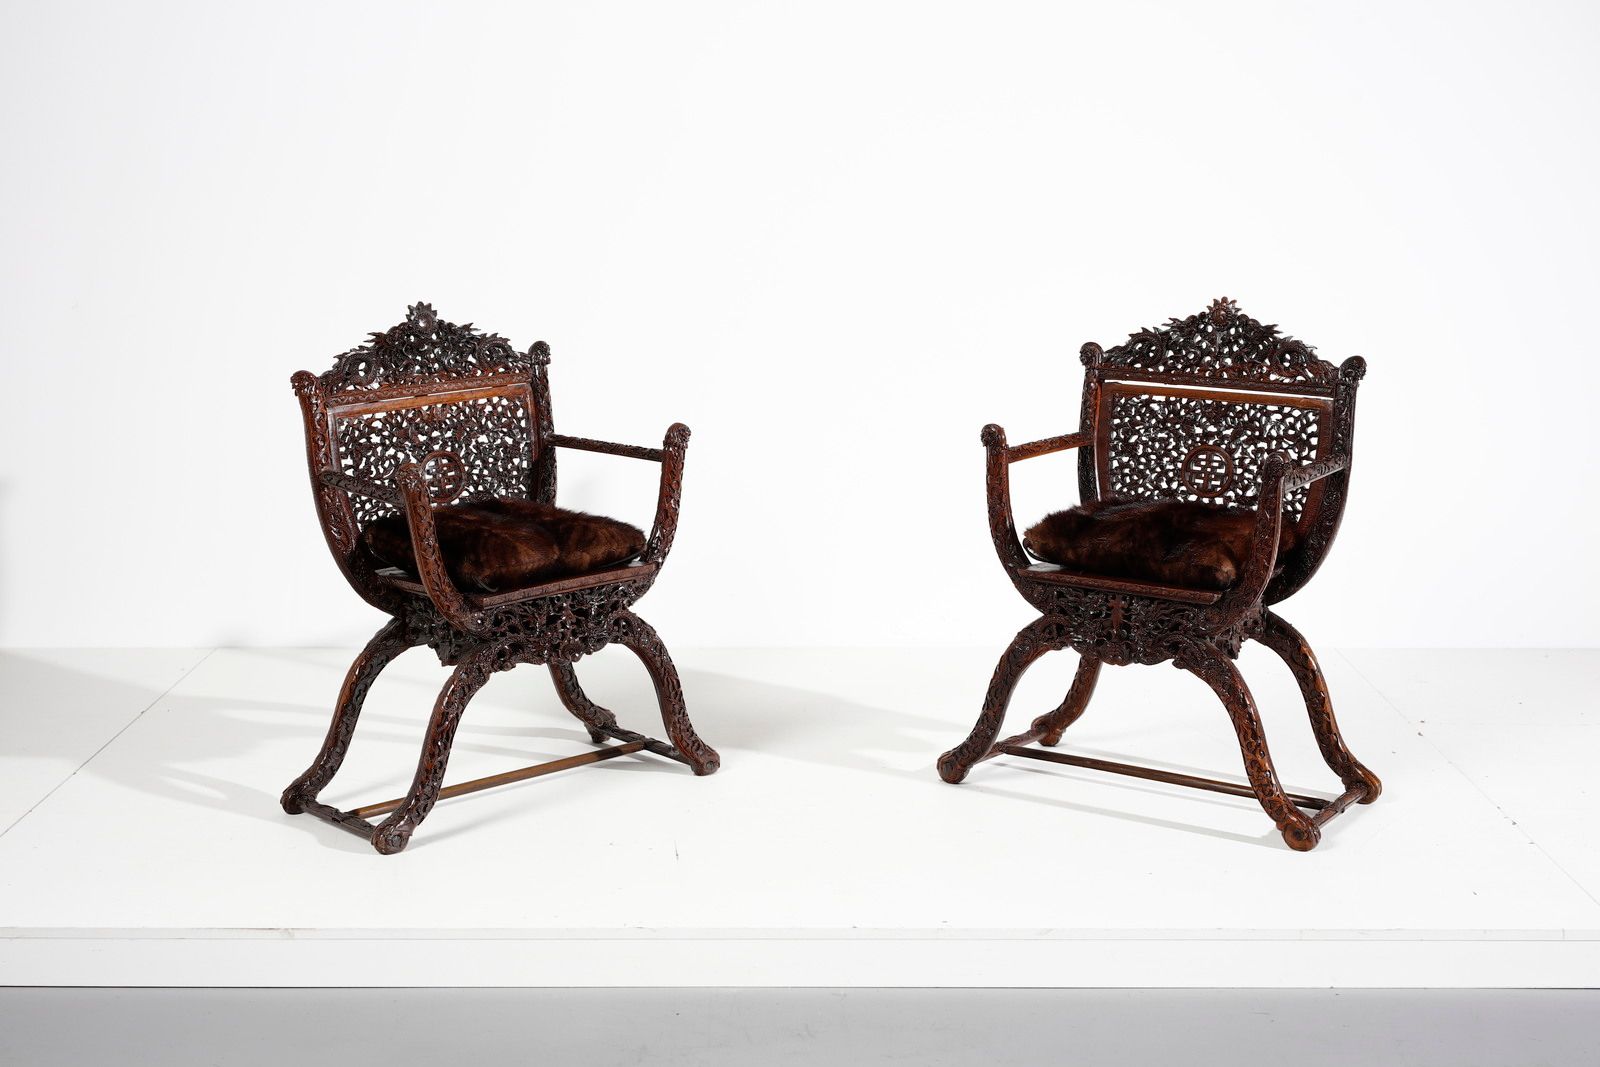 Chinese Art A pair of carved armchairs for the European market 中国艺术。一对用于欧洲市场的雕刻扶&hellip;